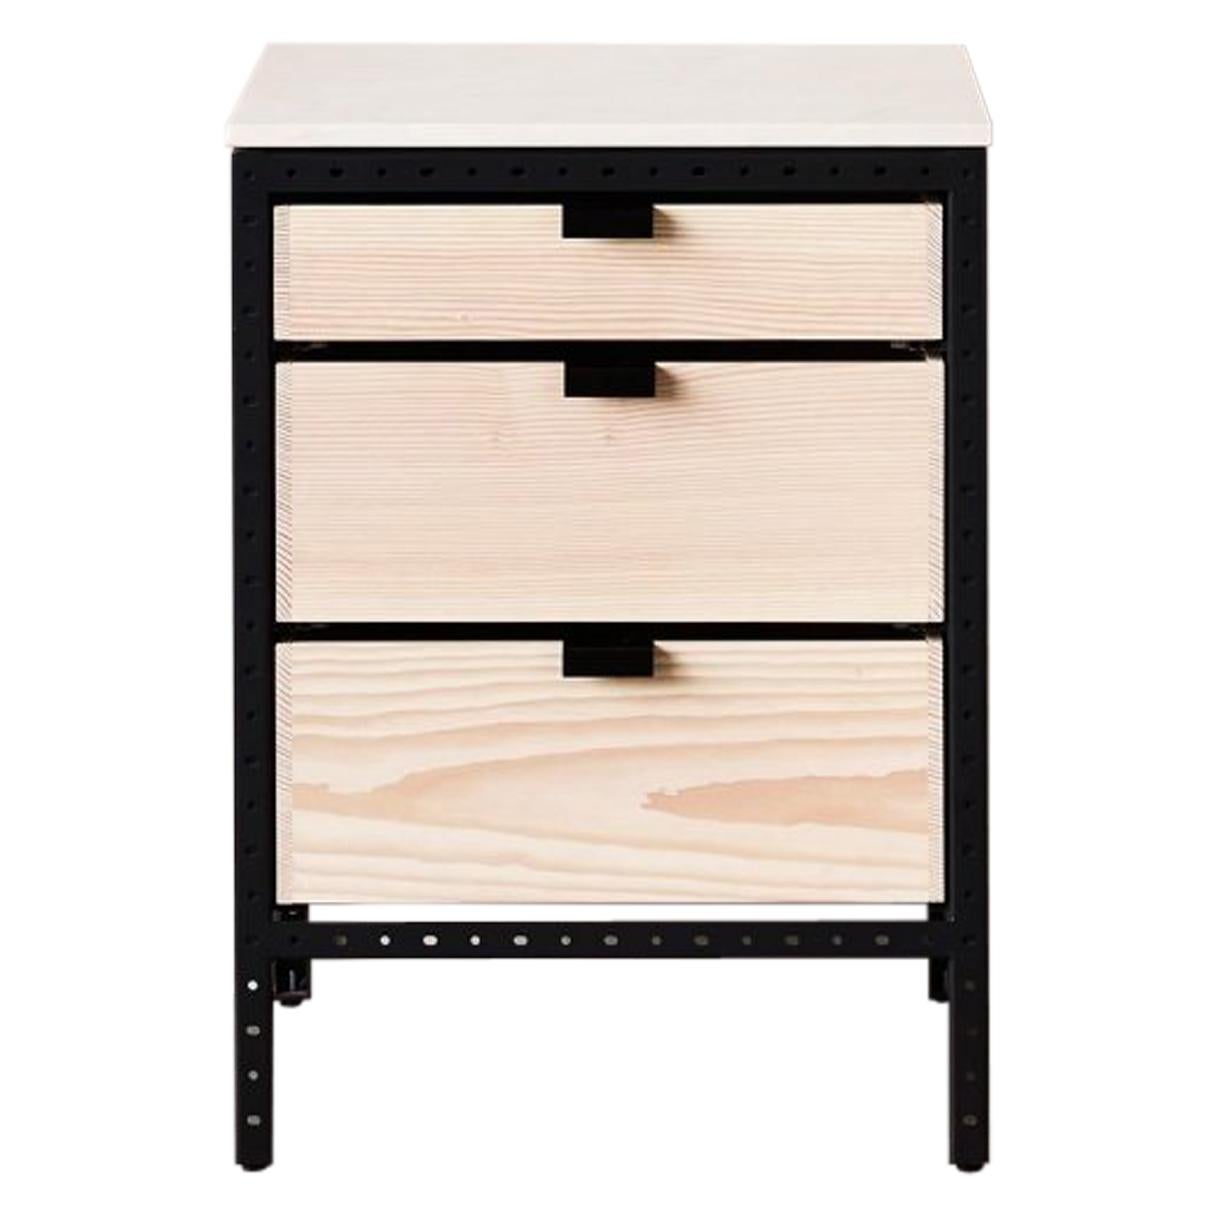 Frama Contemporary Kitchen Unit F in Solid Douglas Fir, Marble and Steel Frame